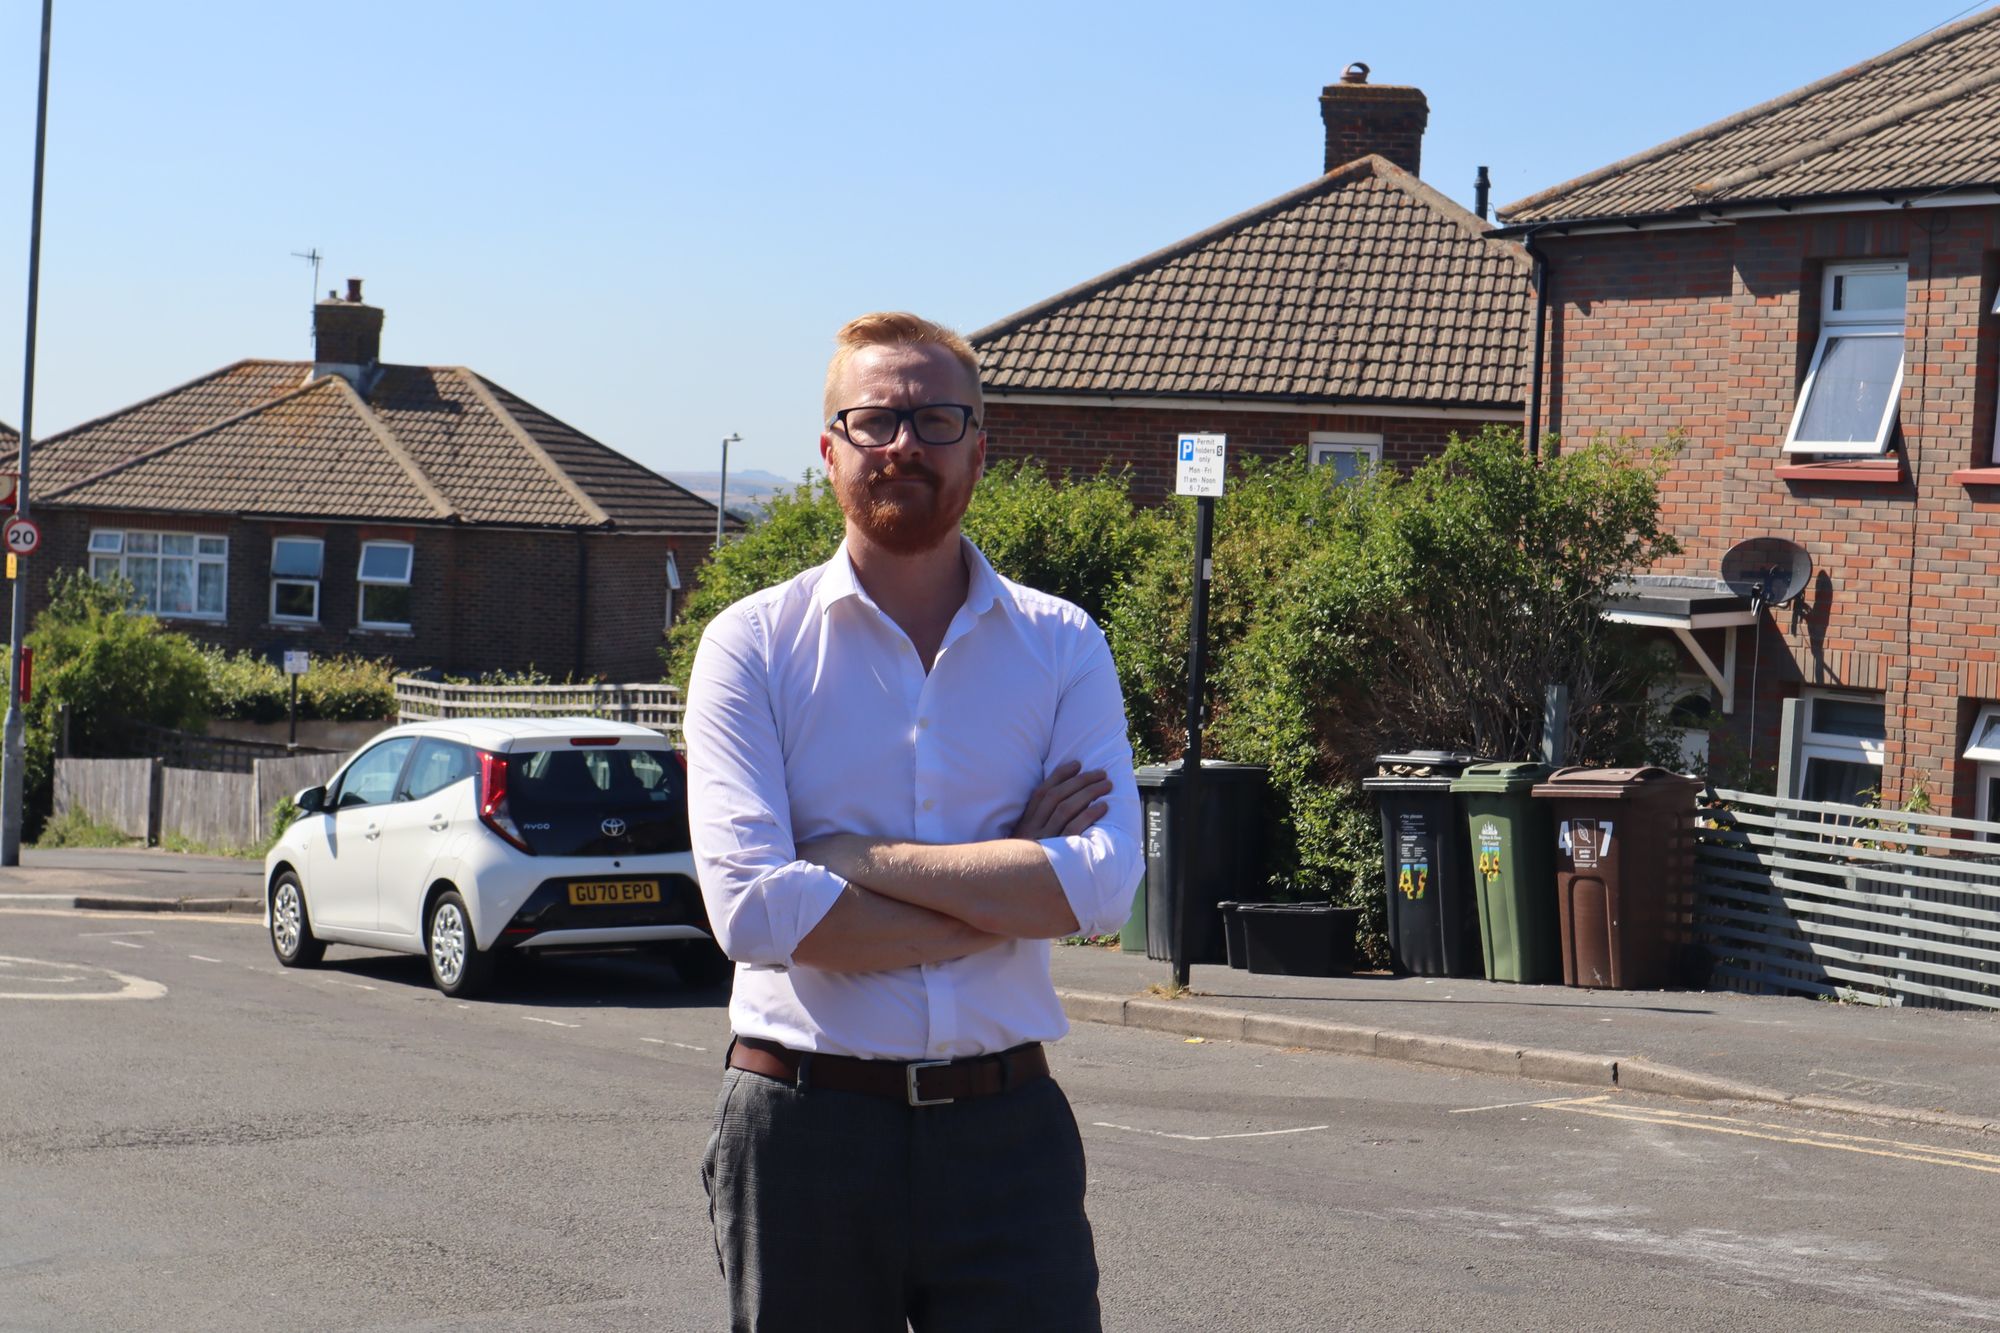 Picture of Lloyd Russell-Moyle standing in a Bevendean street